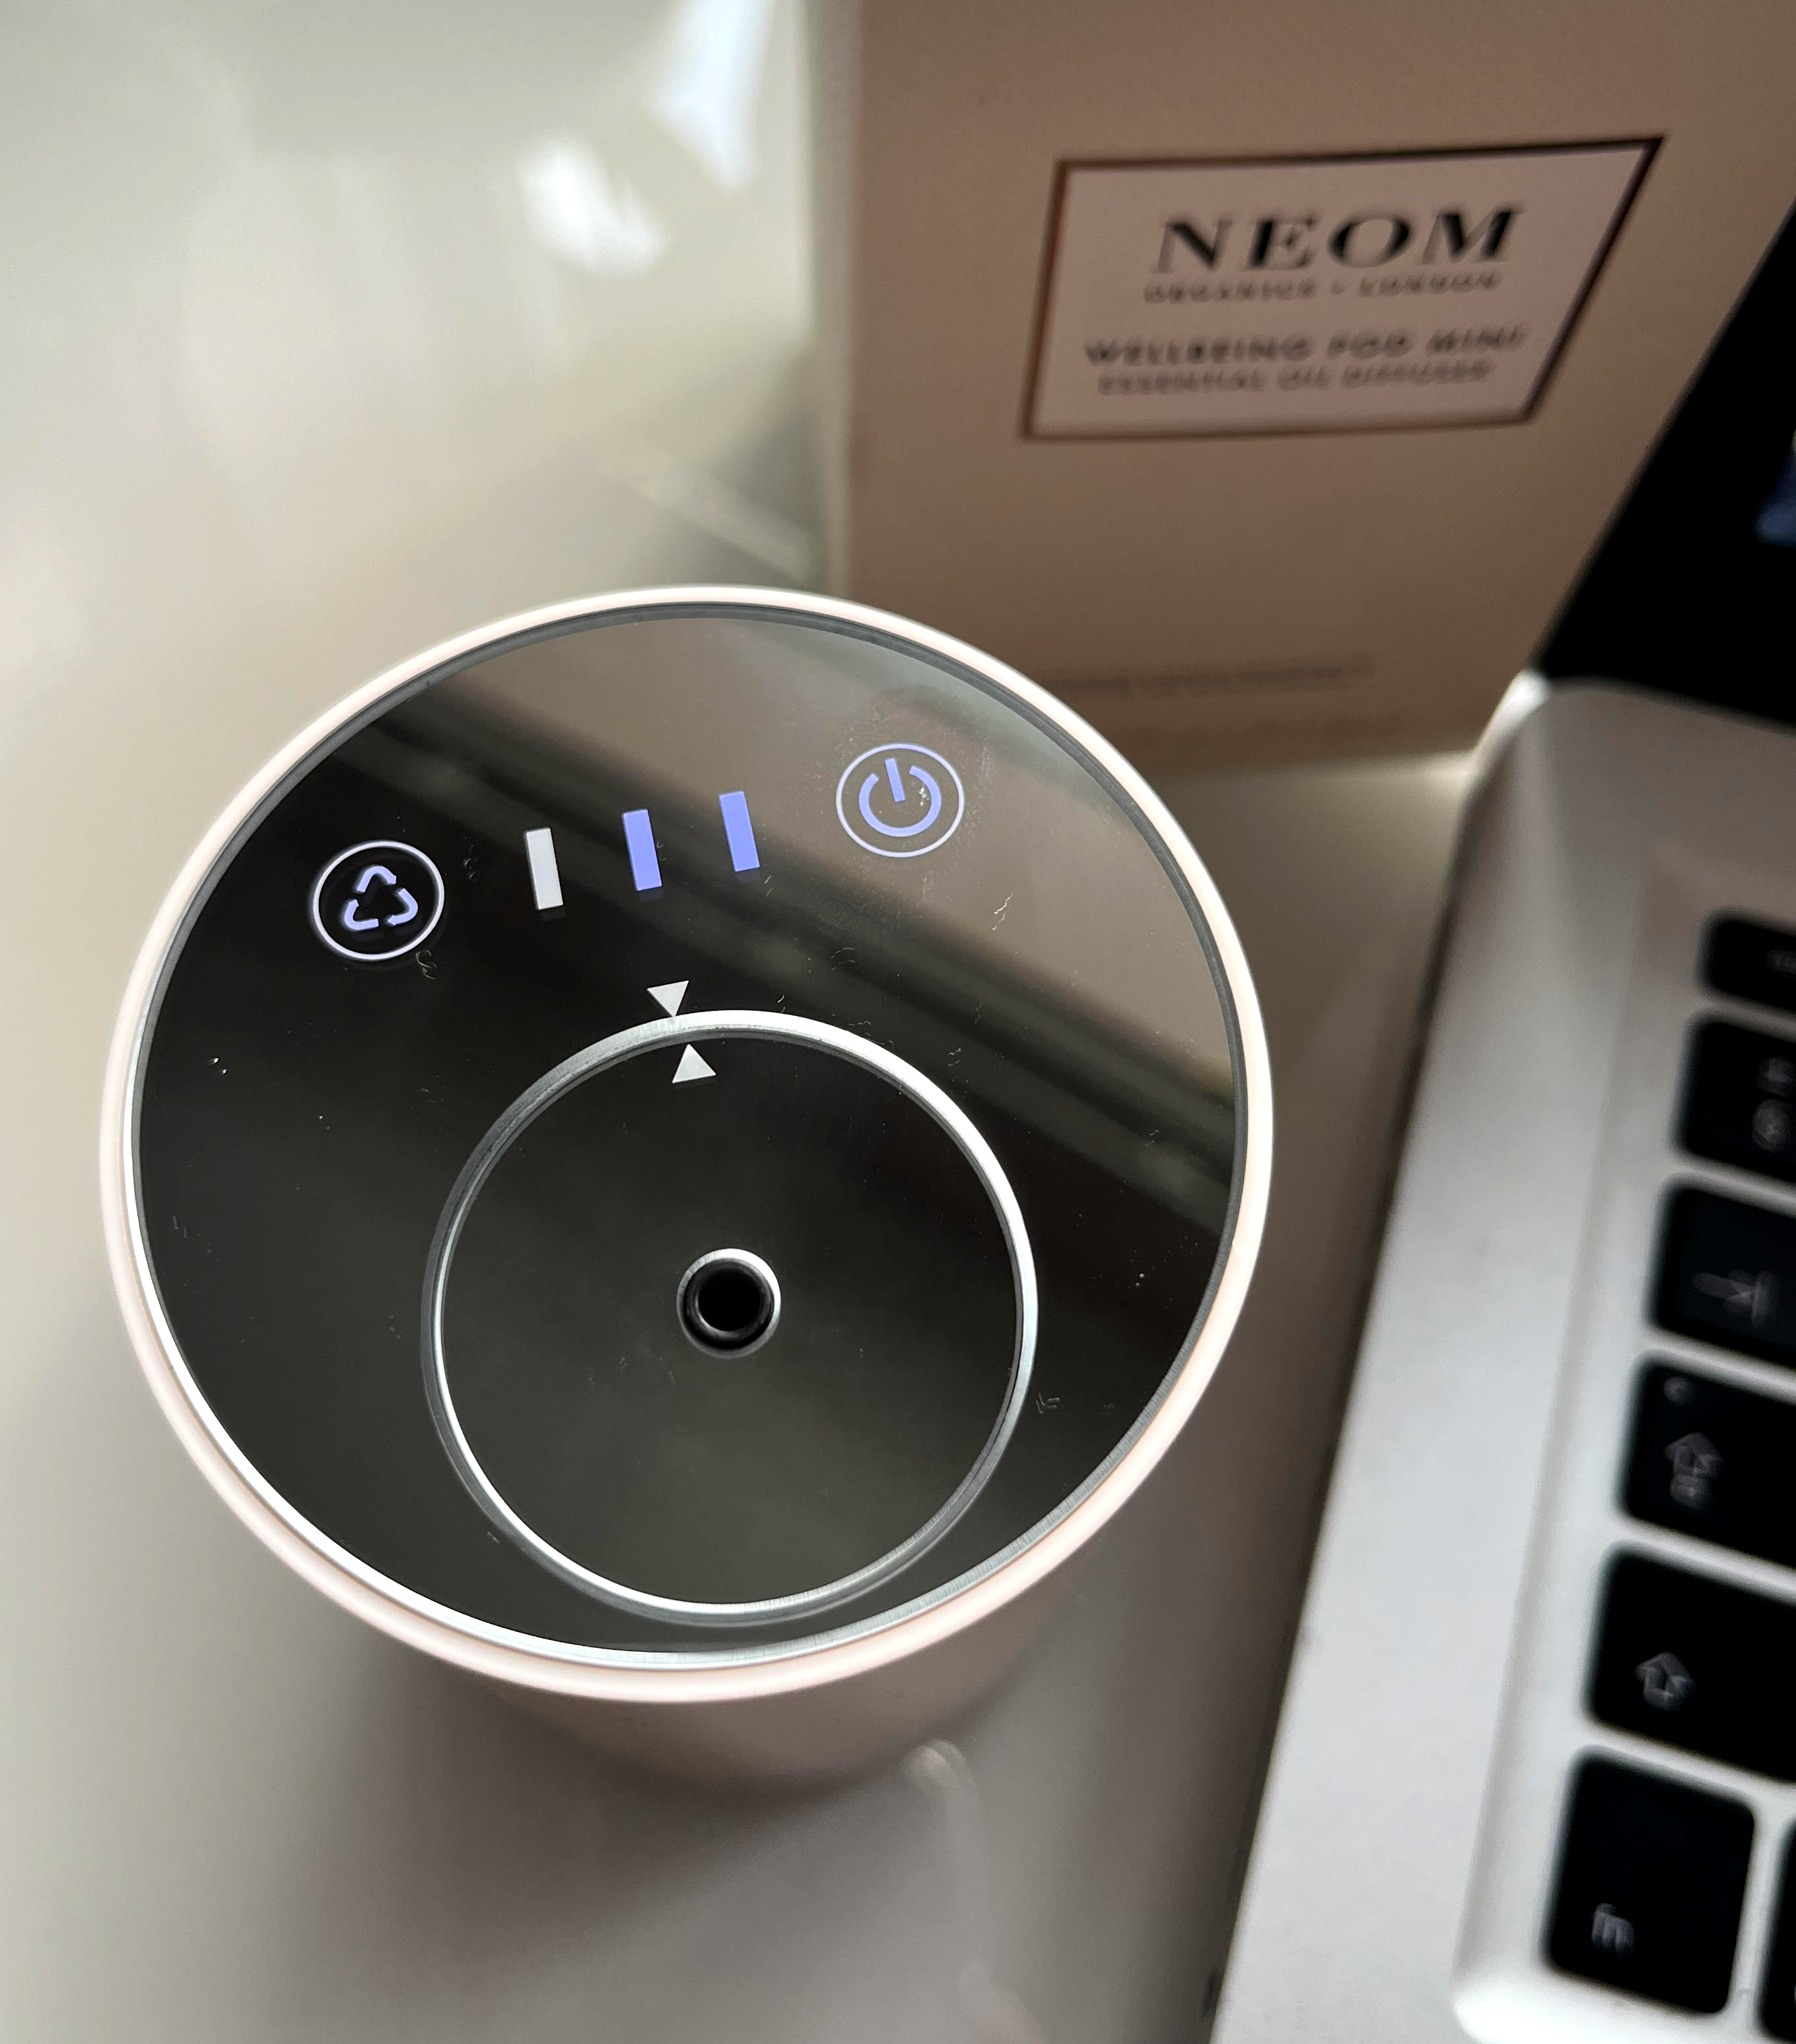 NEOM Wellbeing Pod Mini Essential Oil Diffuser review